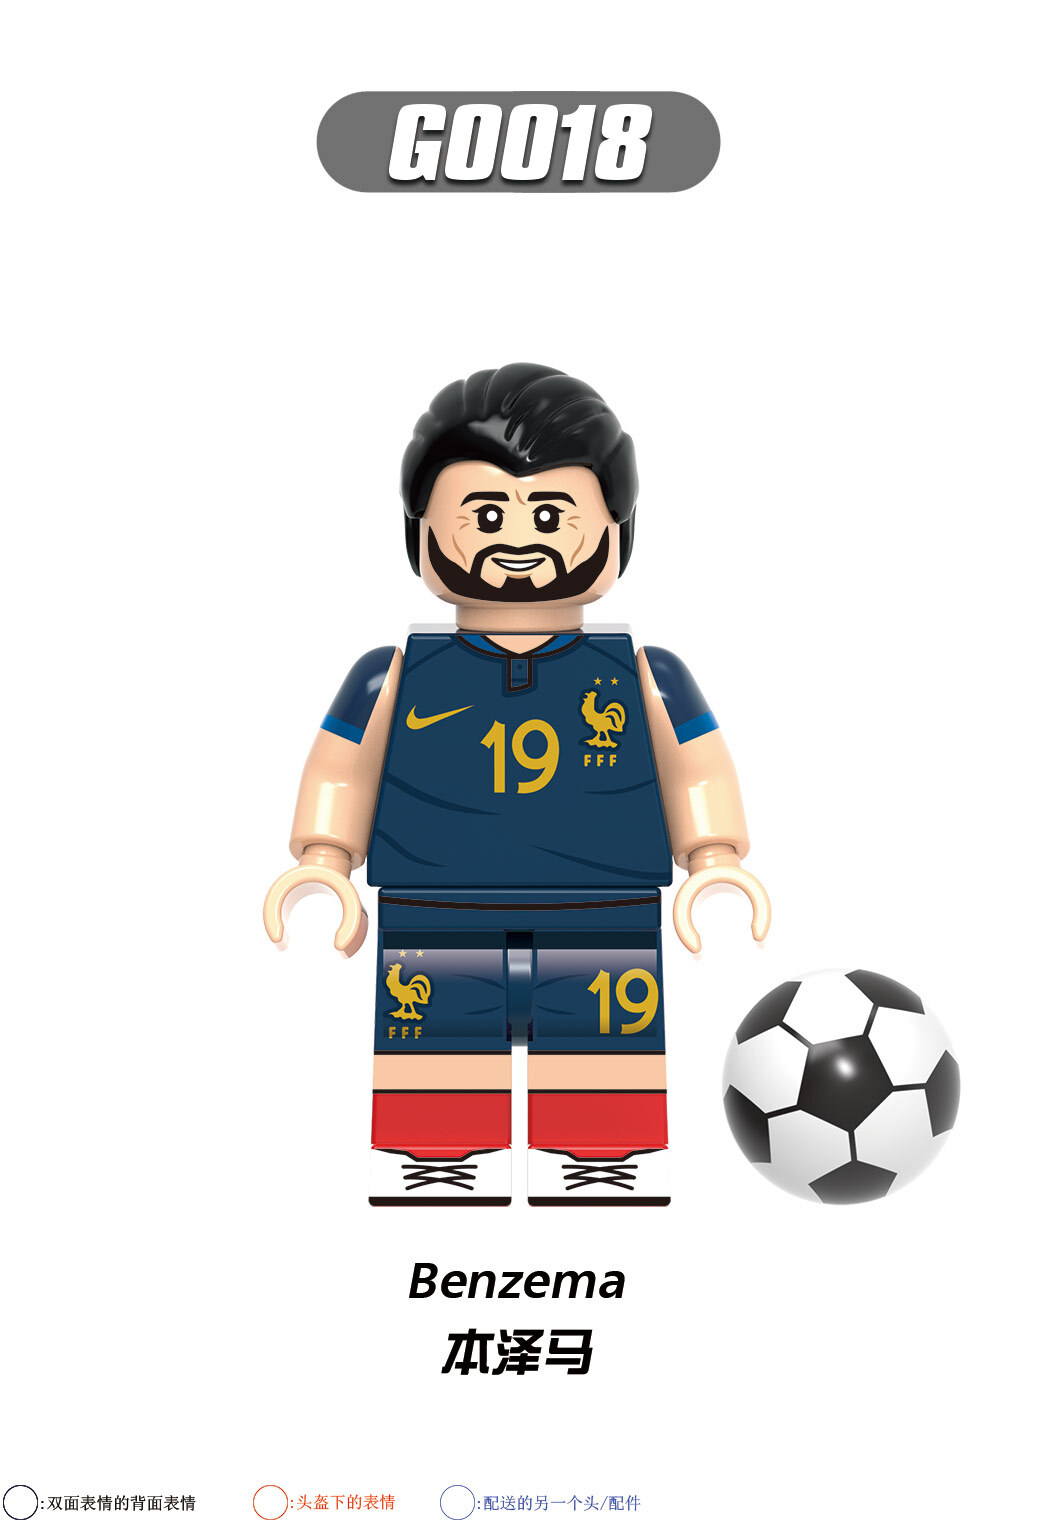 G0103 G0017 G0018 G0019 G0020 G0021 G0022 G0023 G0024 World Cup Football Players Building Blocks Ronaldo Benzema Bale Messi Kroos De Bruyne  Action Figures Educational Toys For Kids Gifts